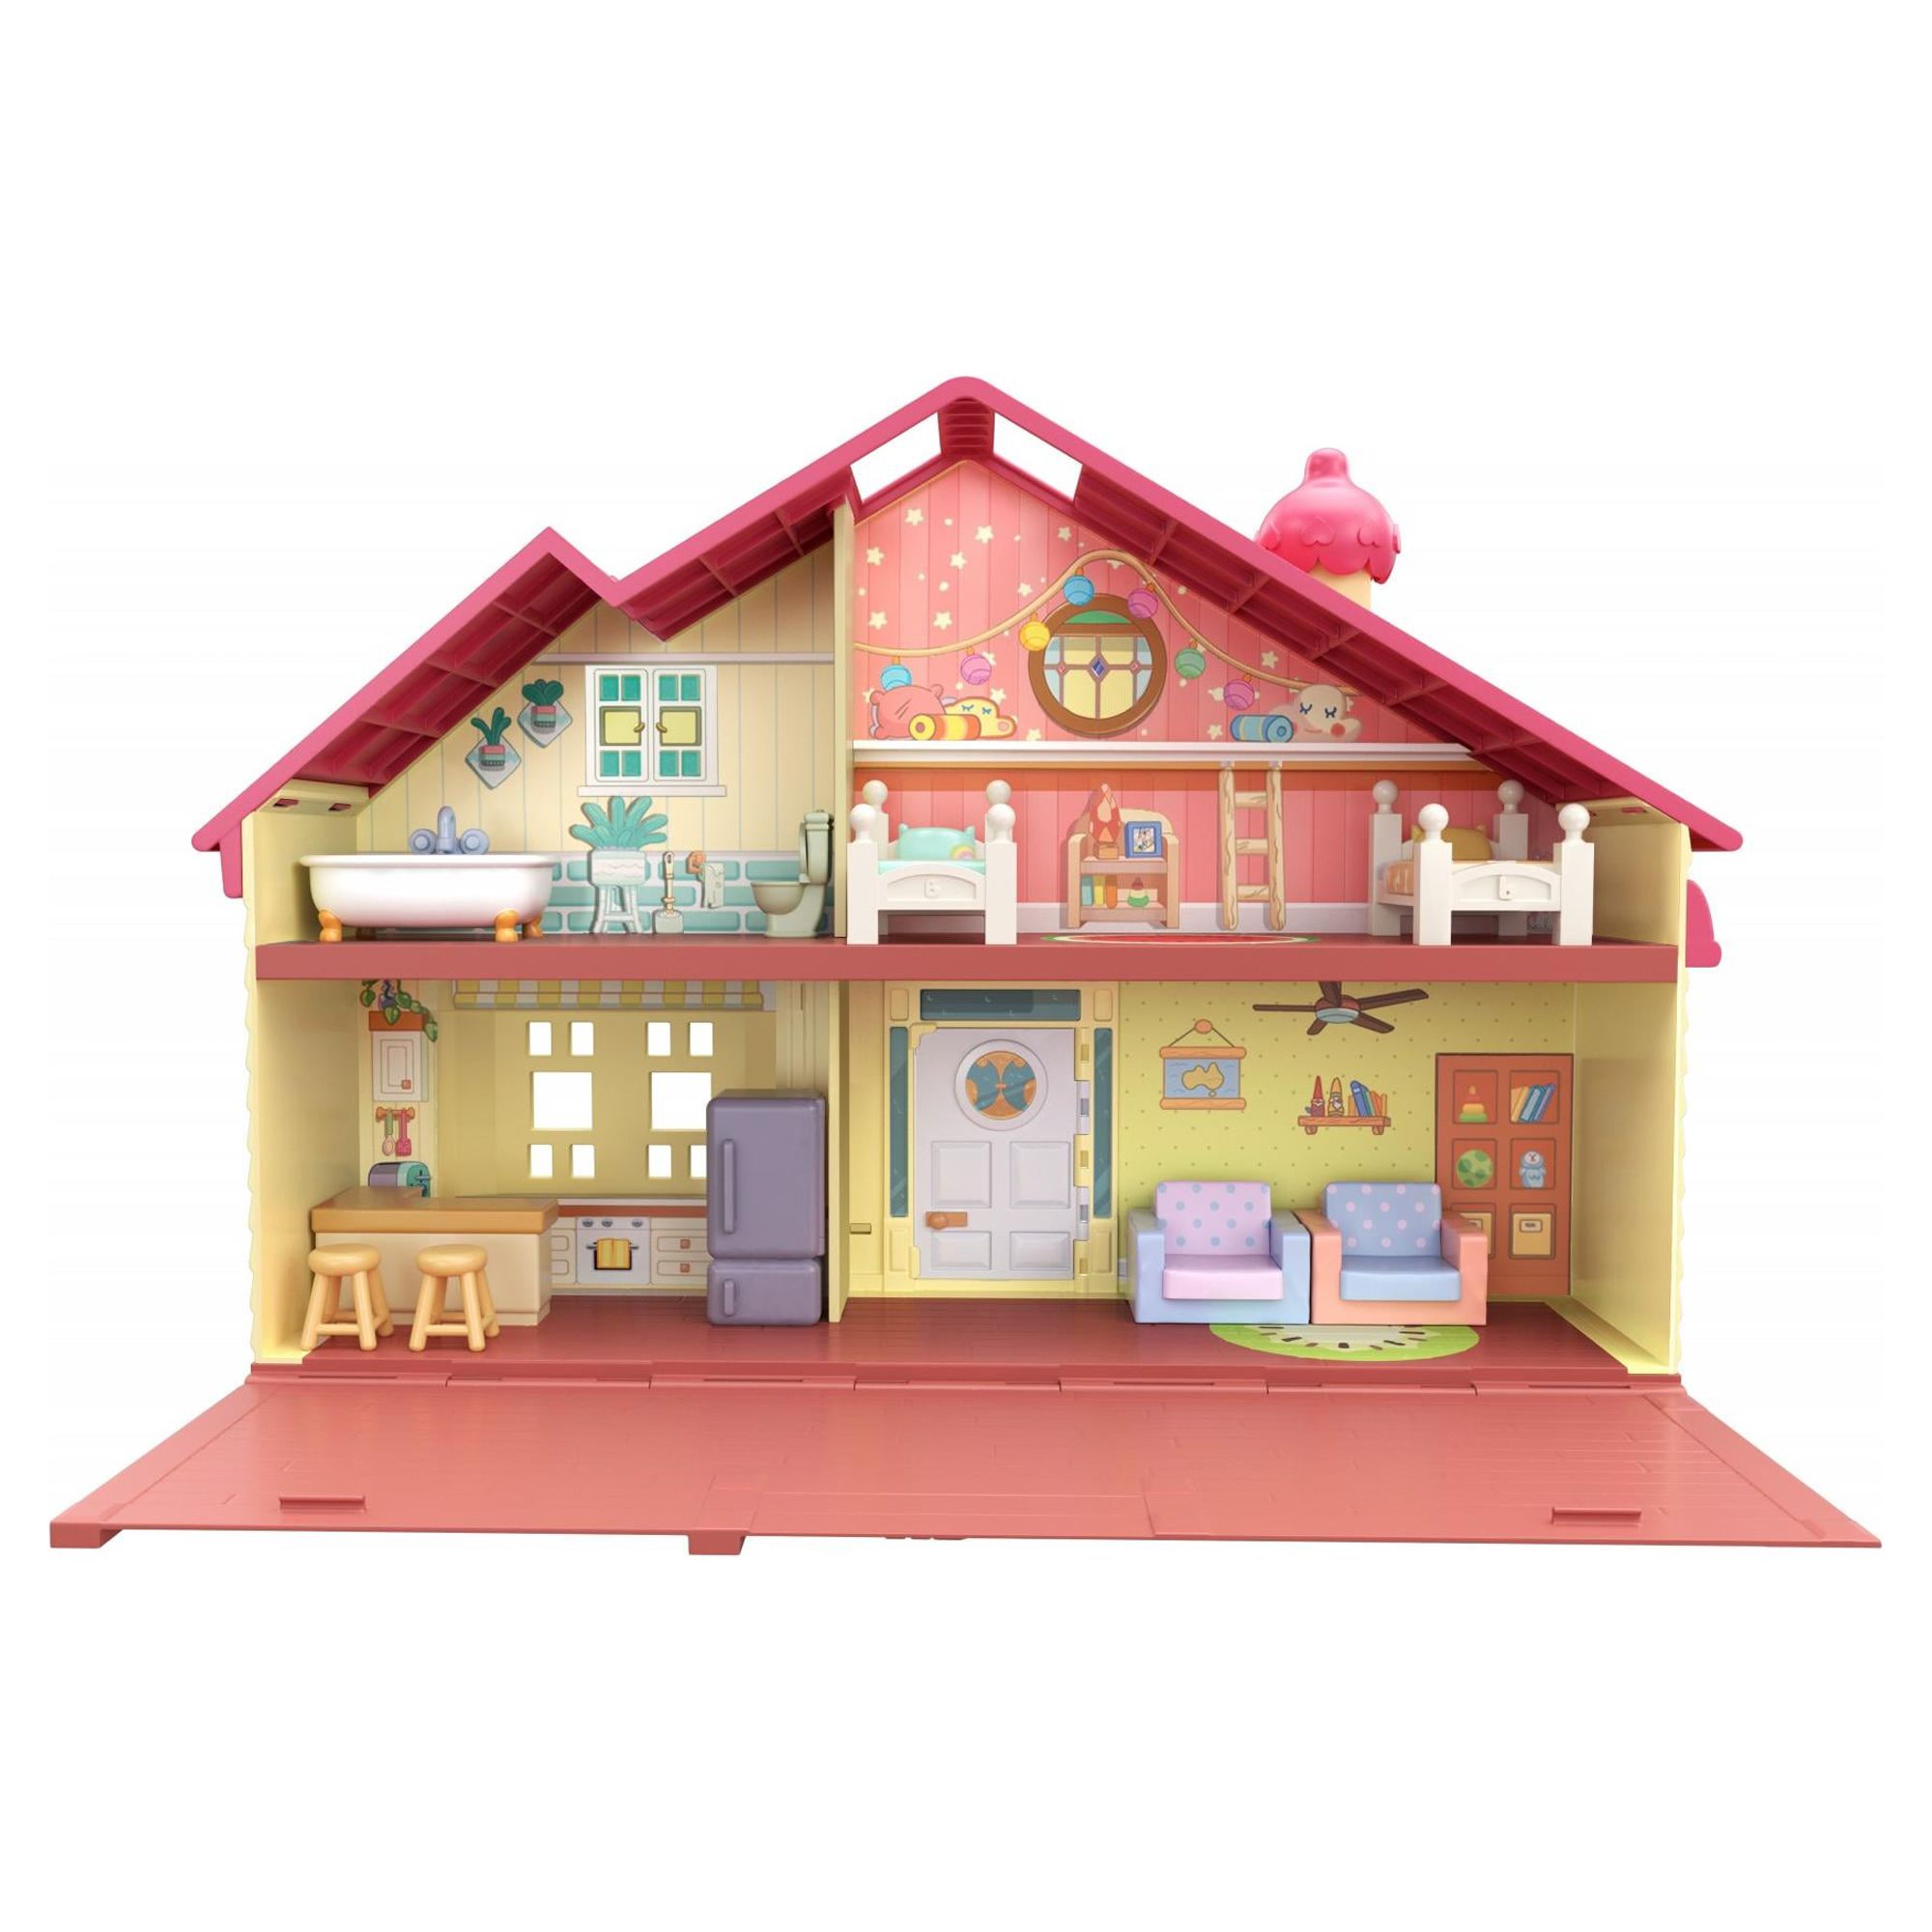 Bluey Family Home - Bluey 2.5-3" Figure with Home Playset - image 1 of 15